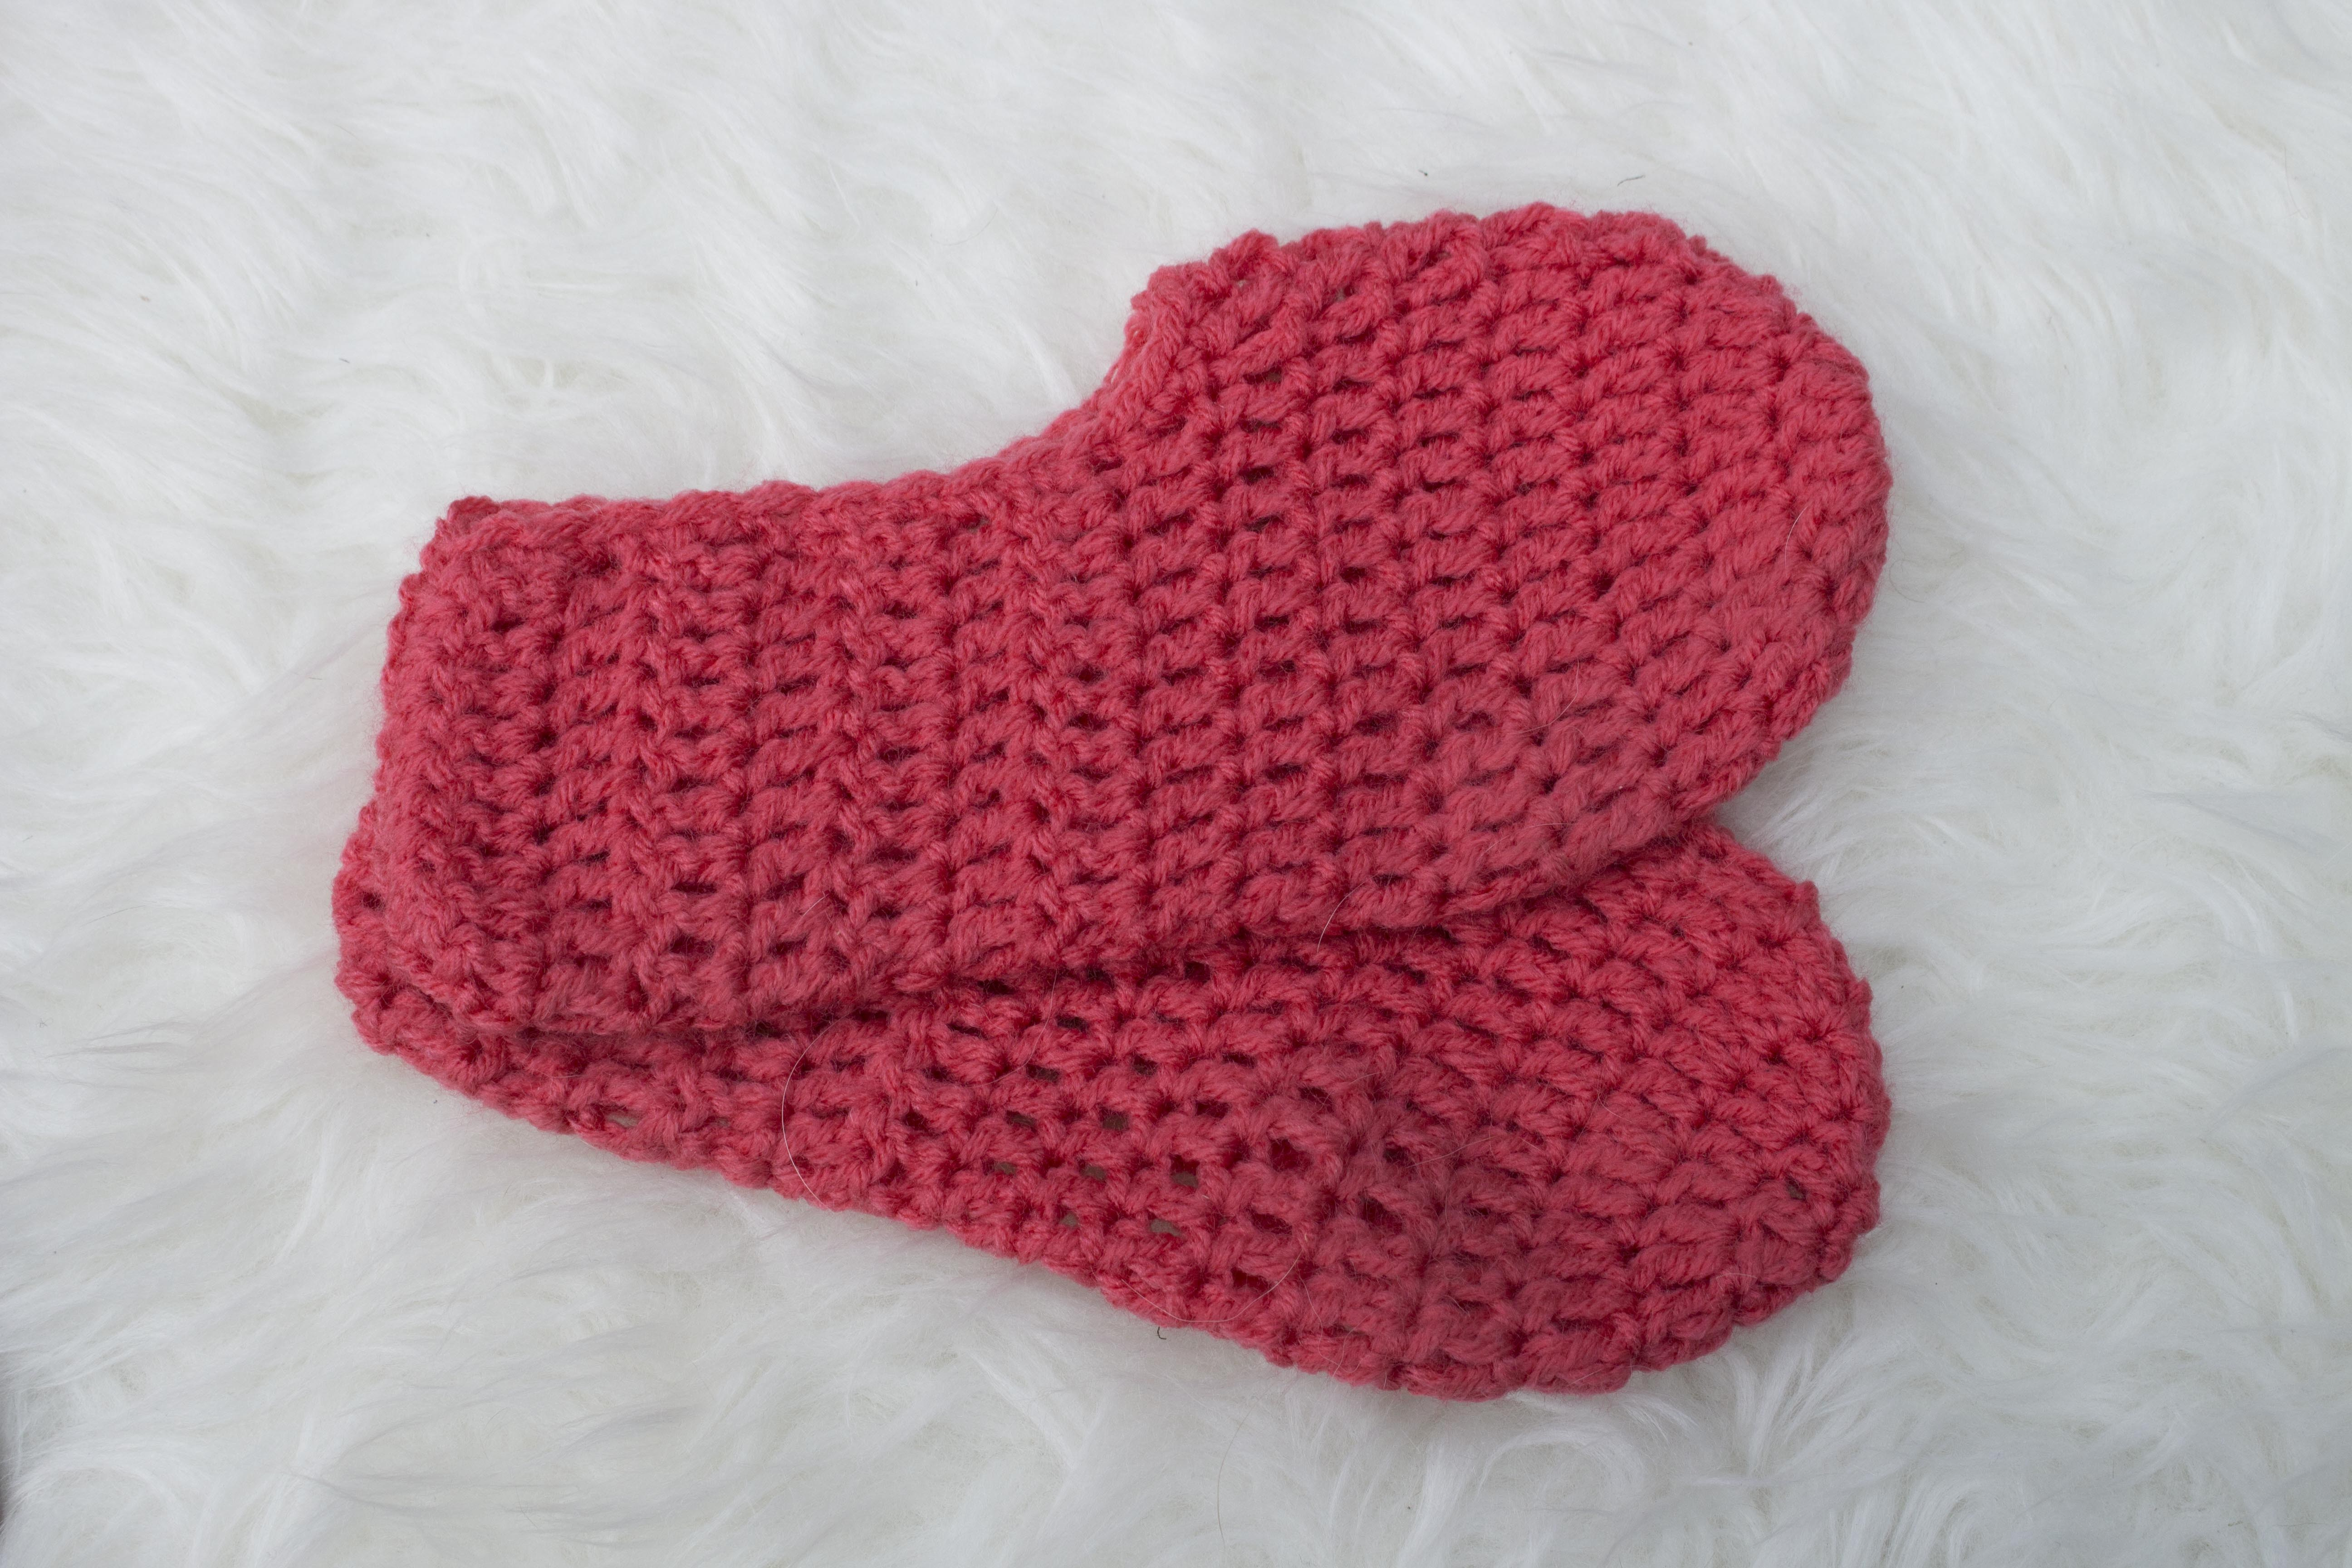 Crochet Slipper Patterns For Toddlers Quick And Easy All Sizes Easy Crochet Slippers Charmed Ashley